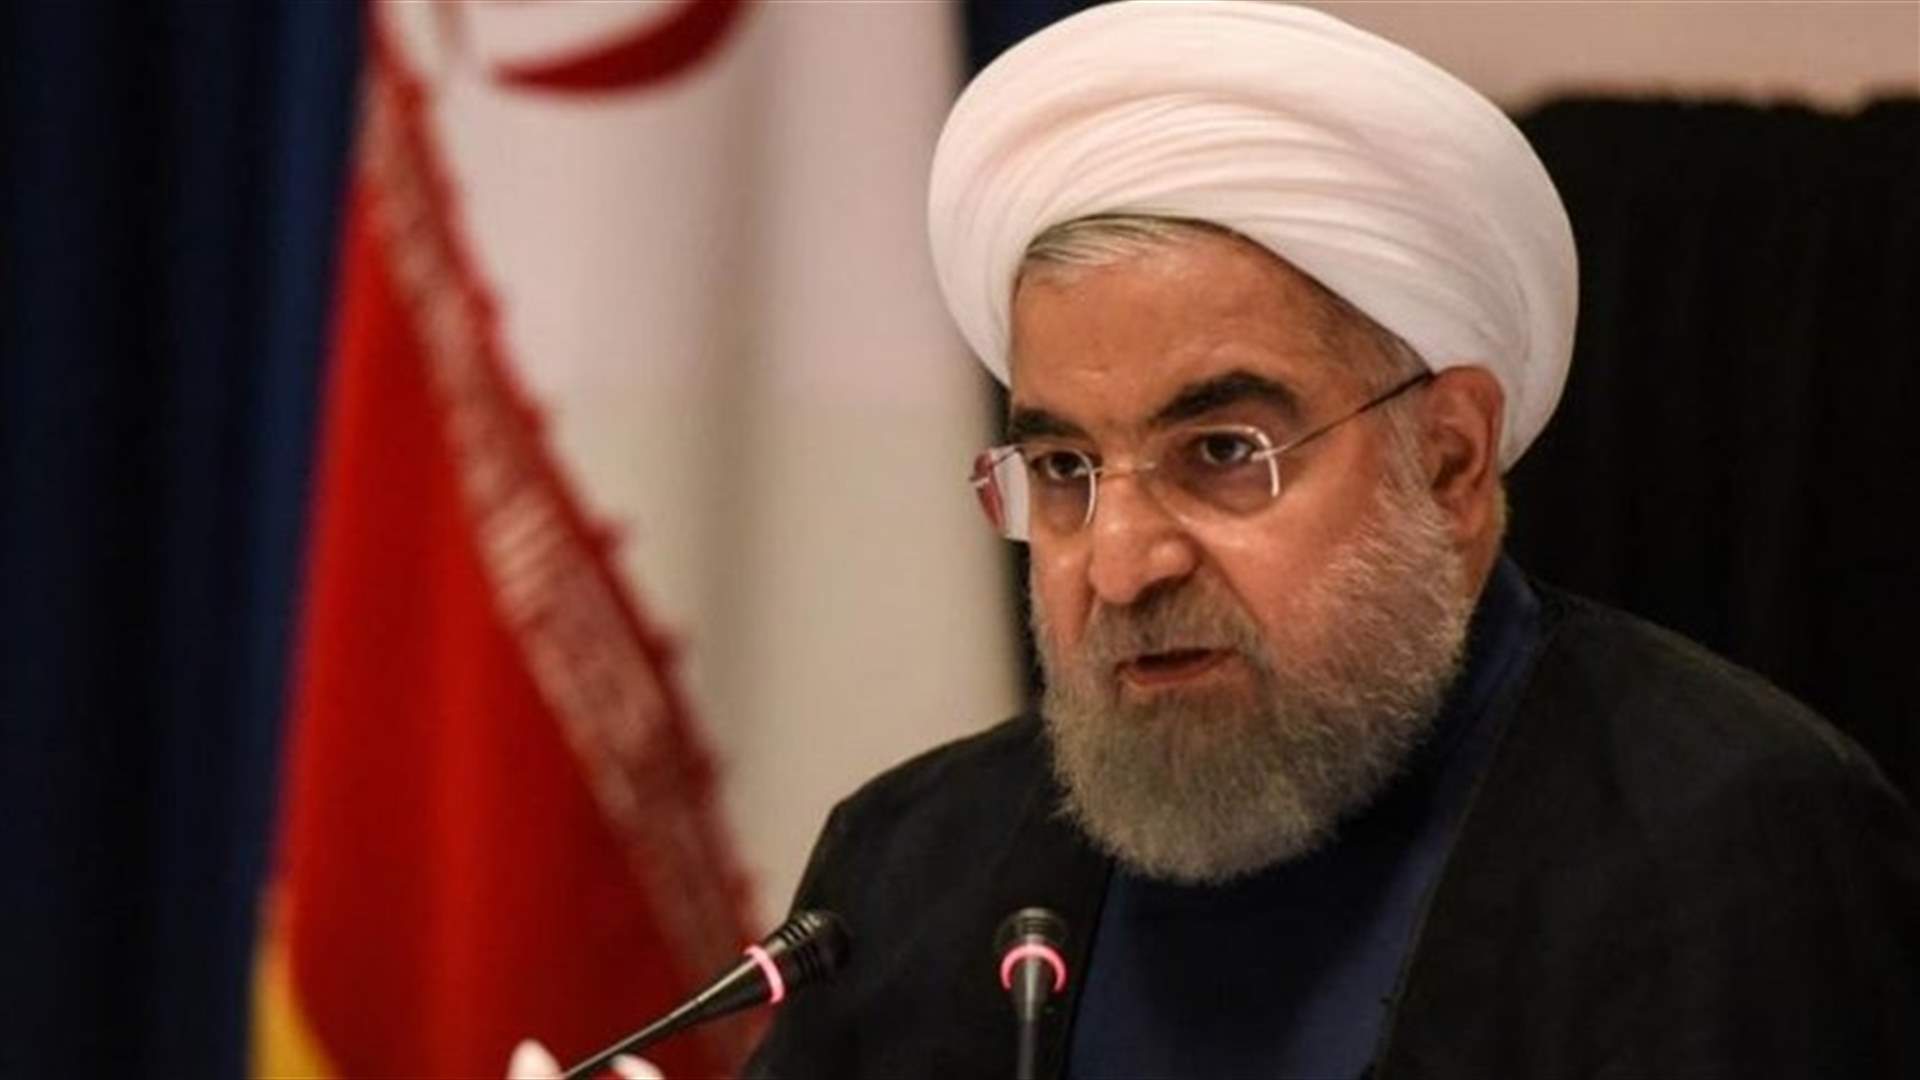 Rouhani says US must lift pressure and apologize before Iran will negotiate